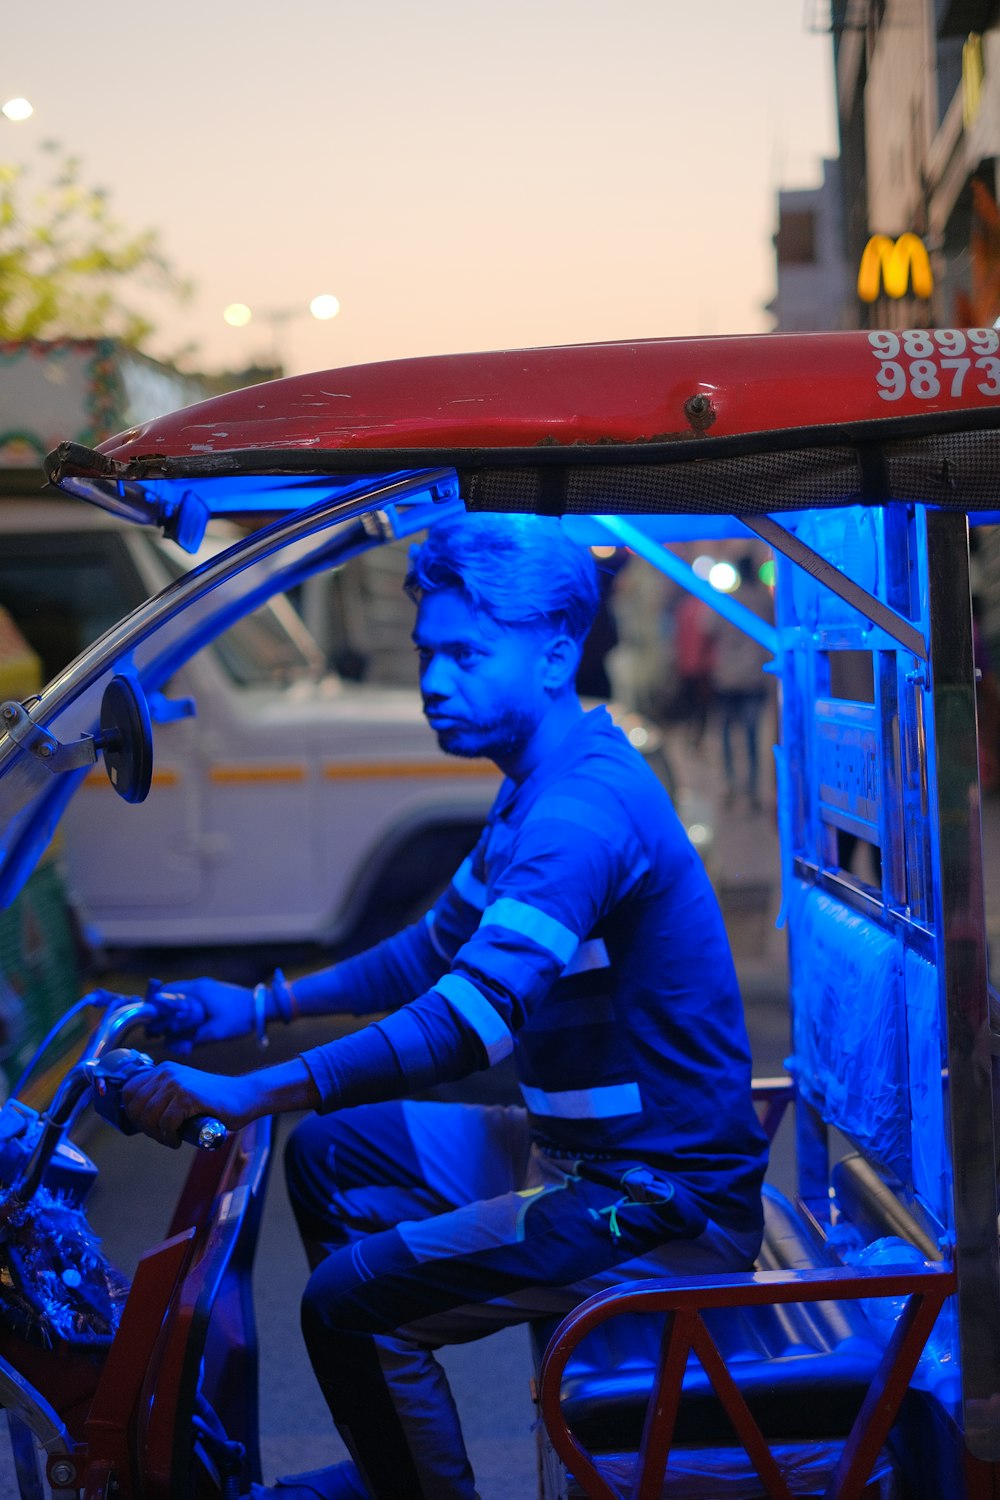 a man on a motorcycle with a blue face painted on it